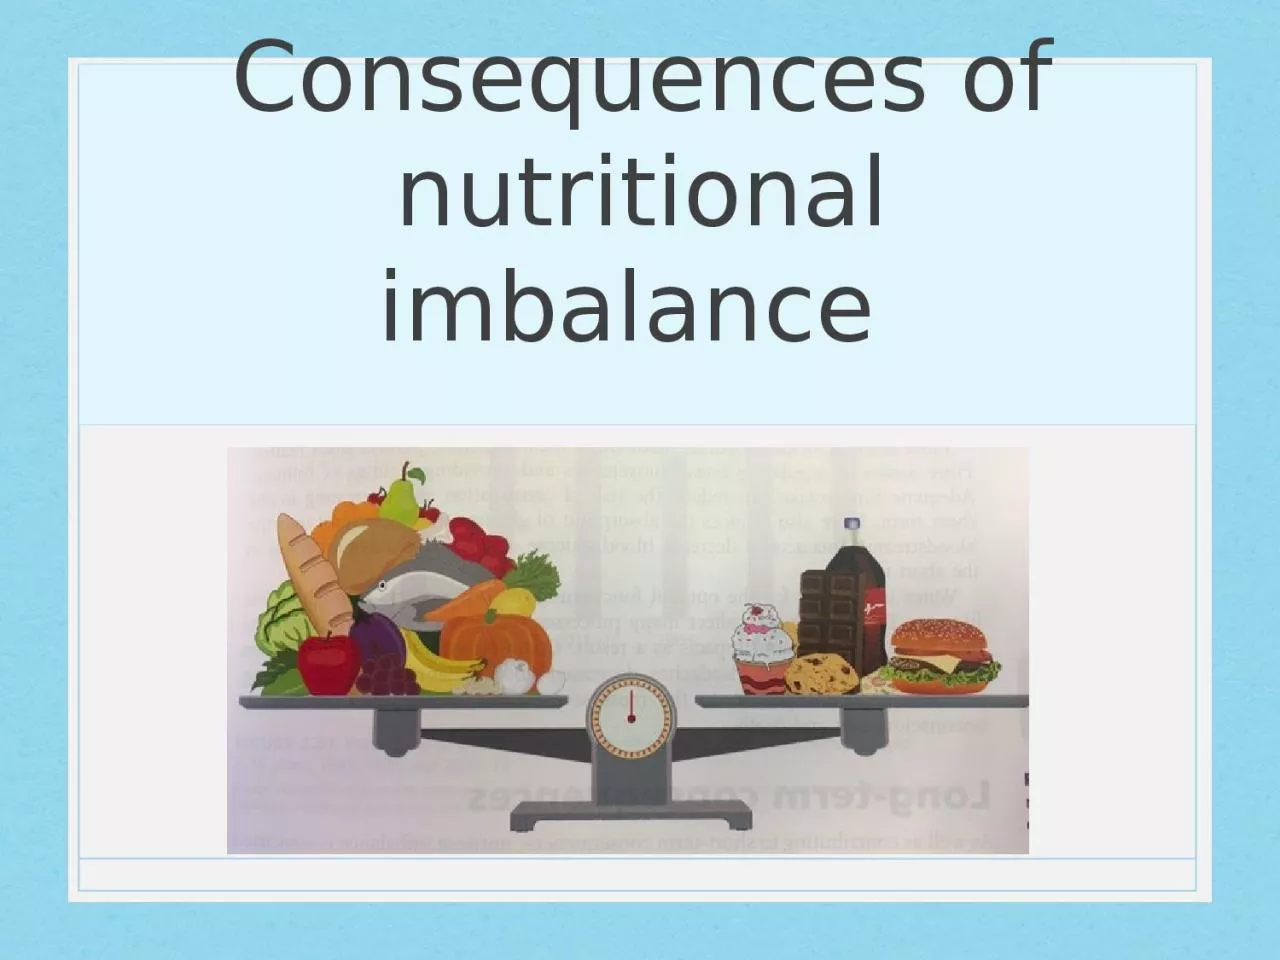 Consequences of nutritional imbalance